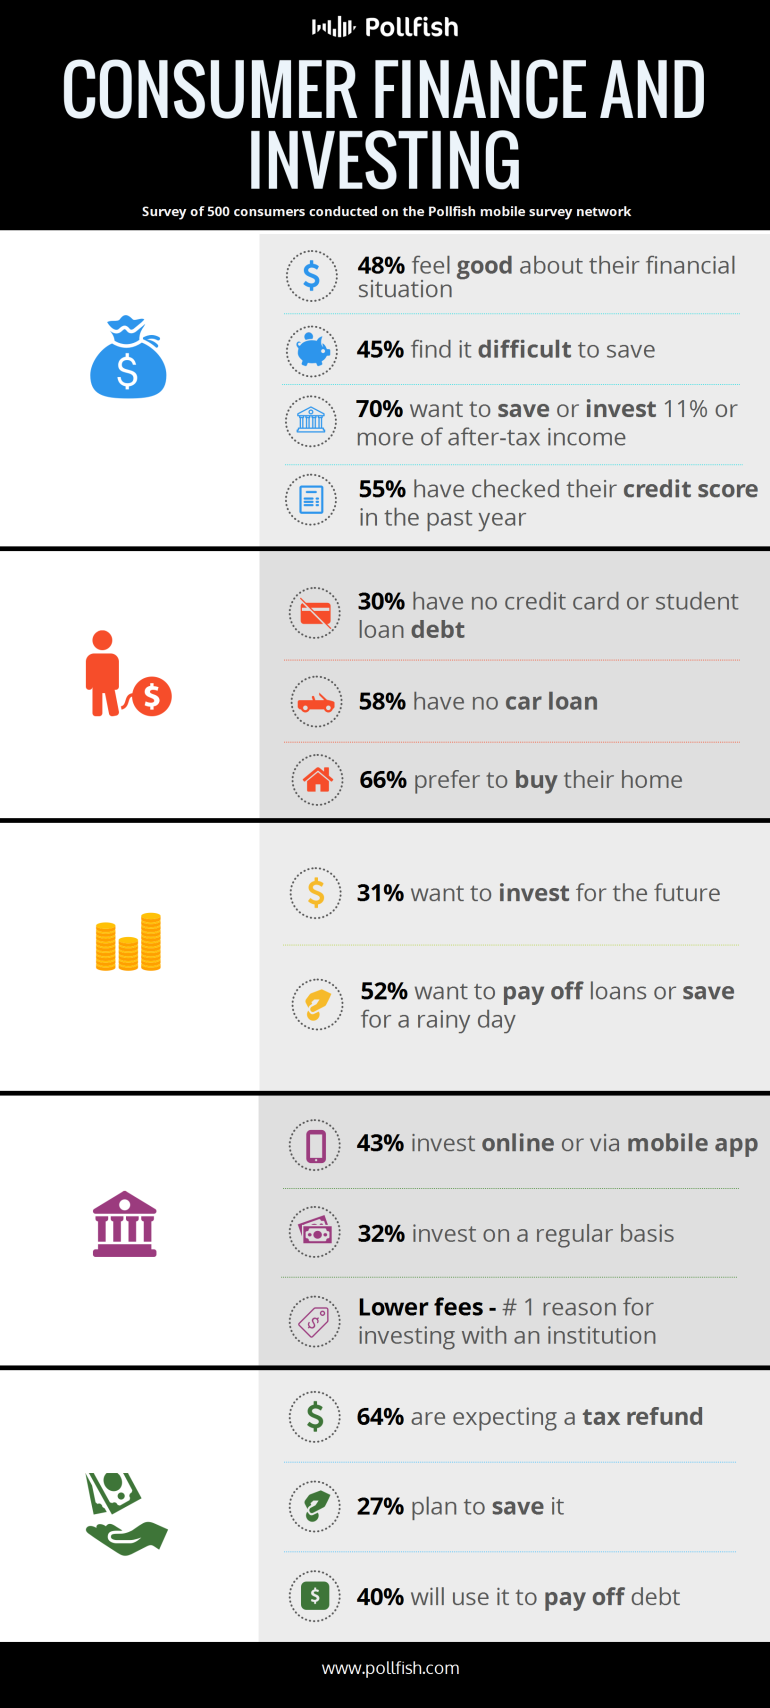 Pollfish Mobile Survey of Consumer Finance and Investing